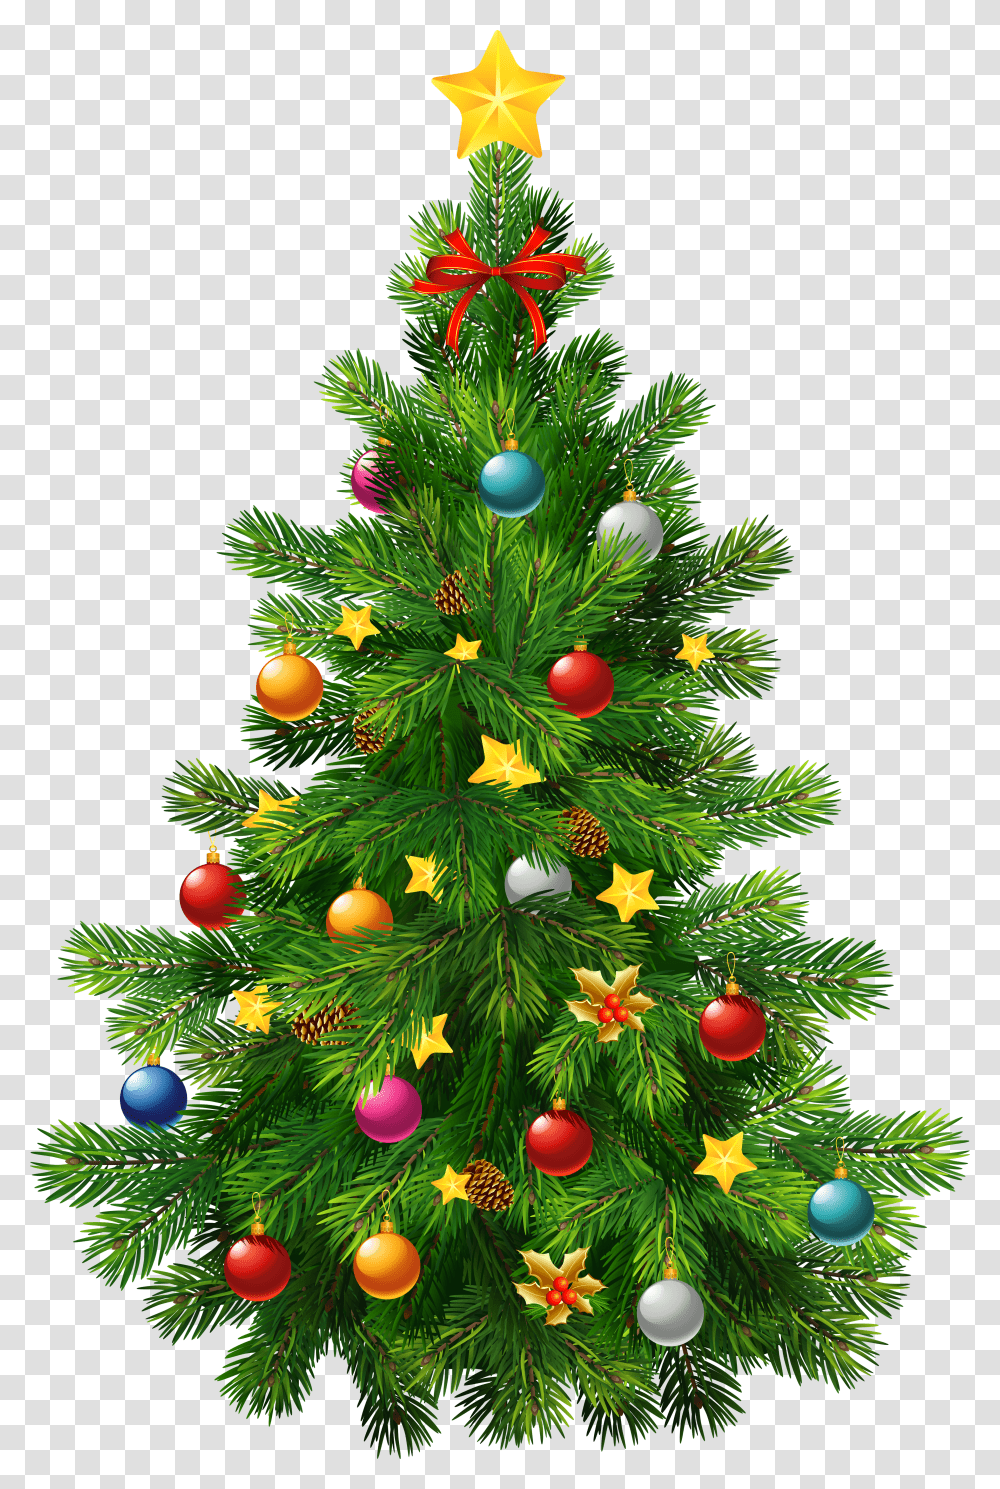 Deco Tree Ornament Large Christmas Clipart Christmas Tree Background Transparent Png